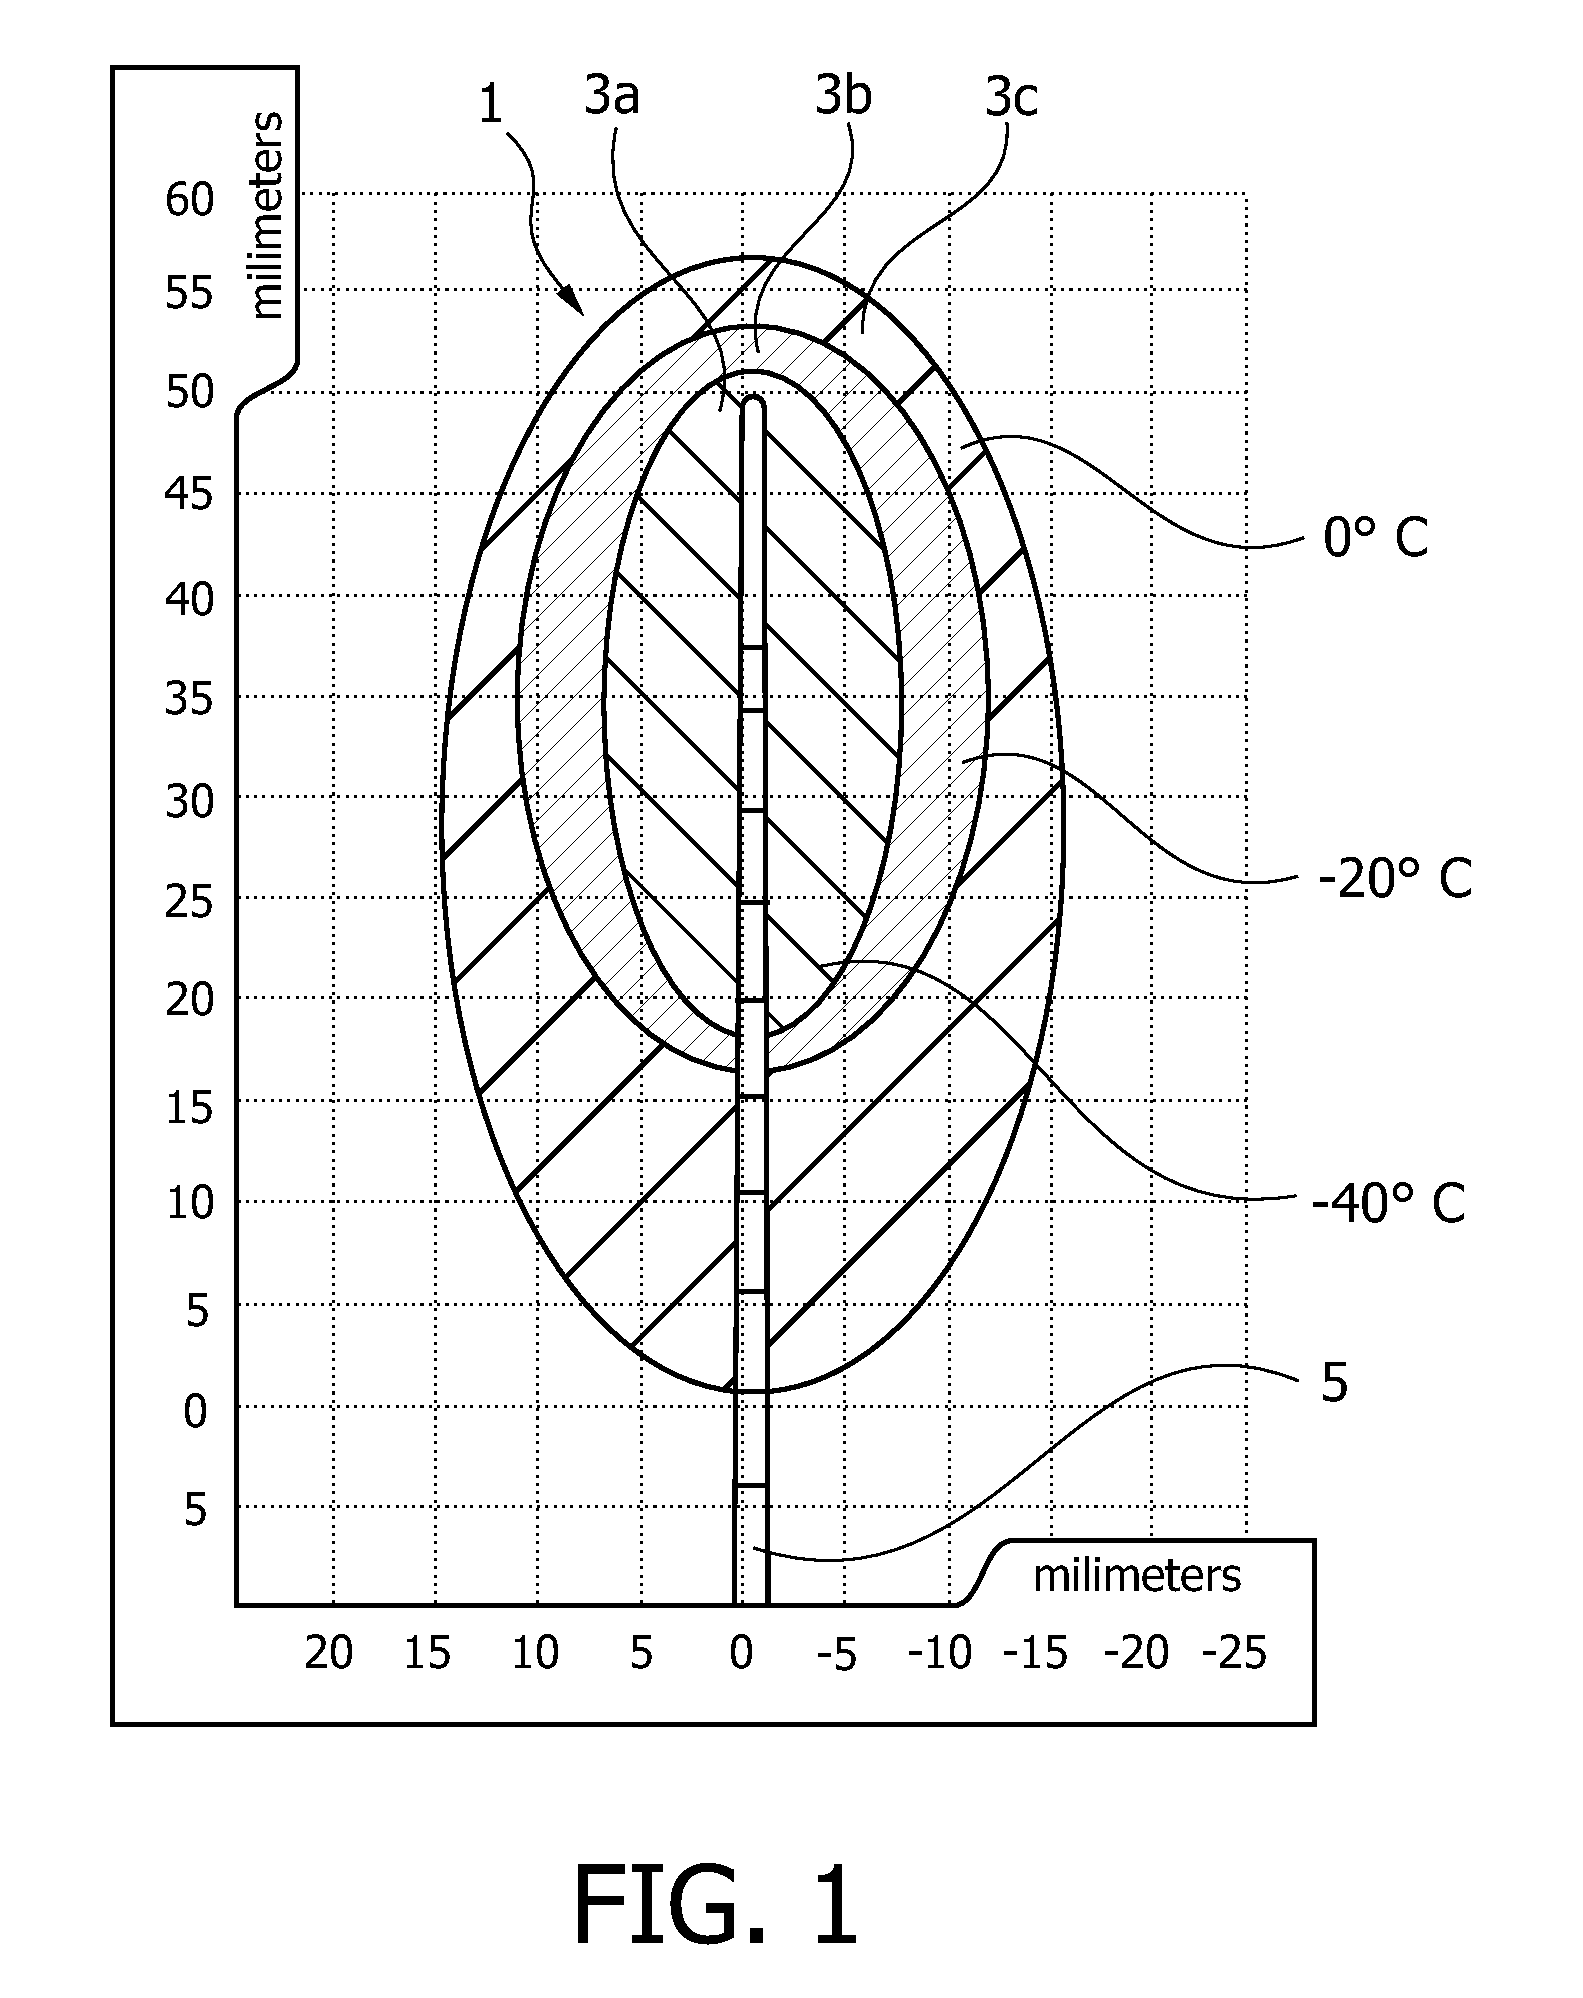 Clipping-plane-based ablation treatment planning